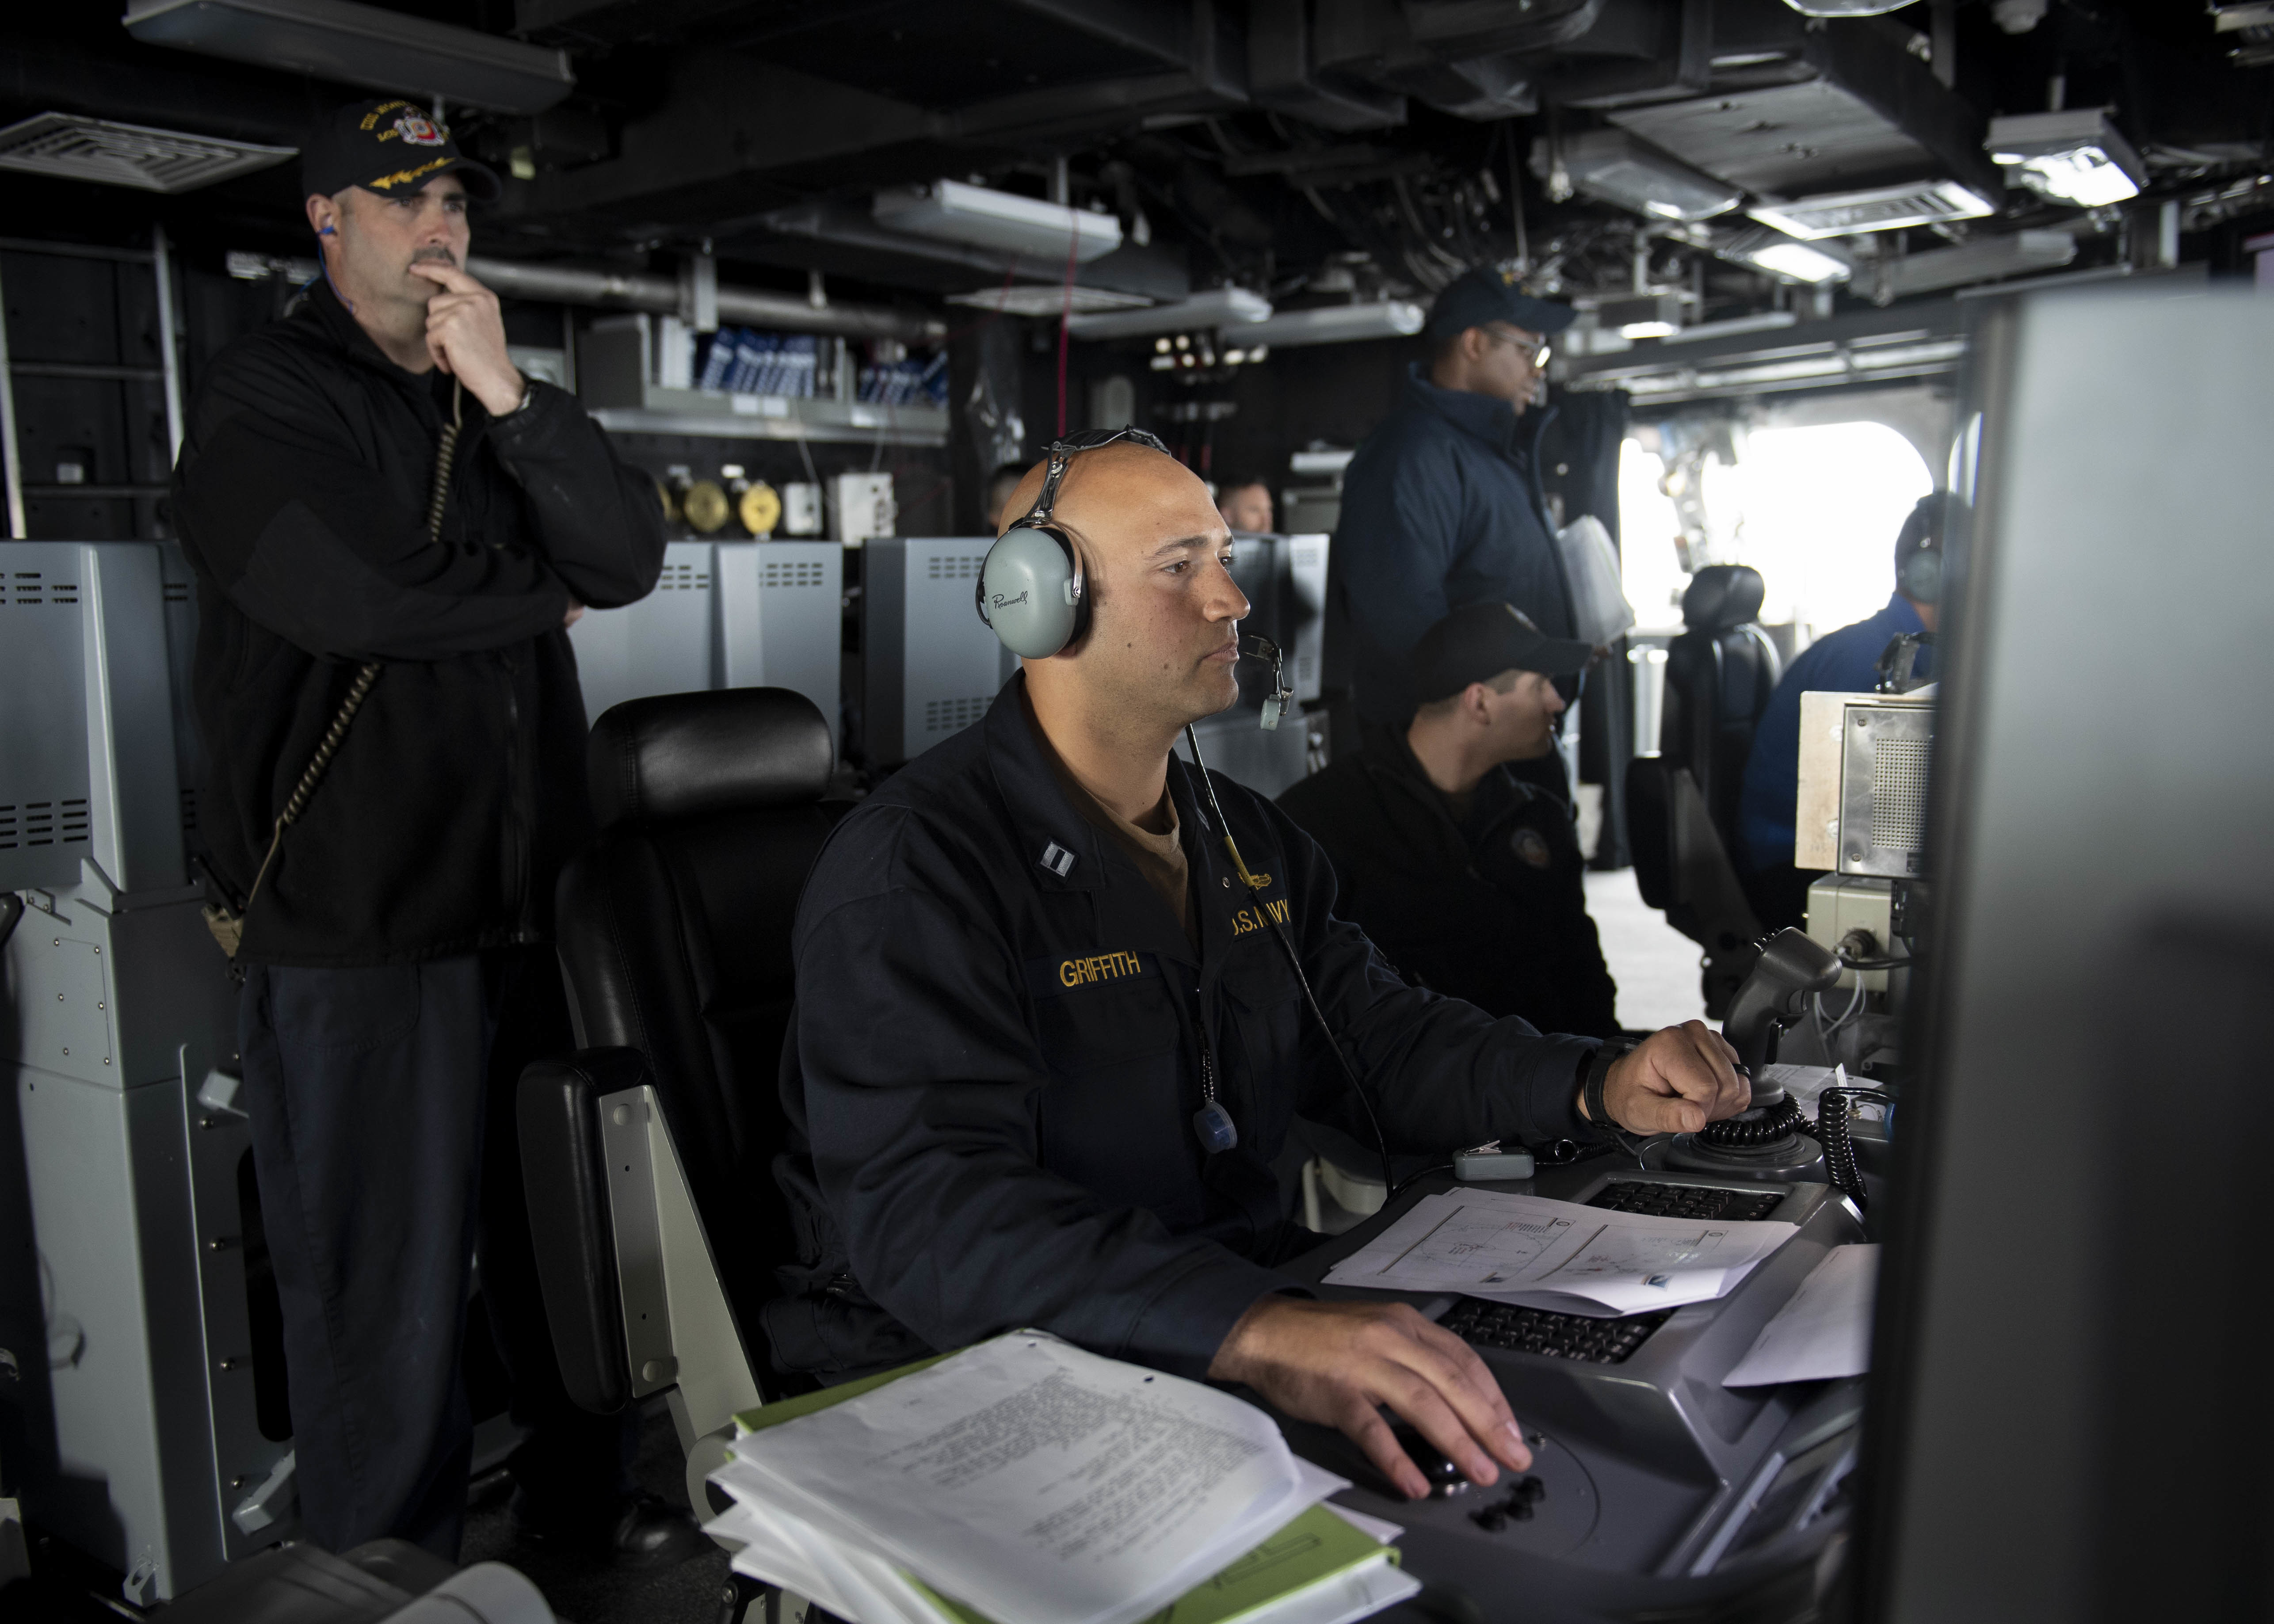 Navy Conducts First Lcs Advanced Training With Pair Of Ships Larger Event Planned This Summer 